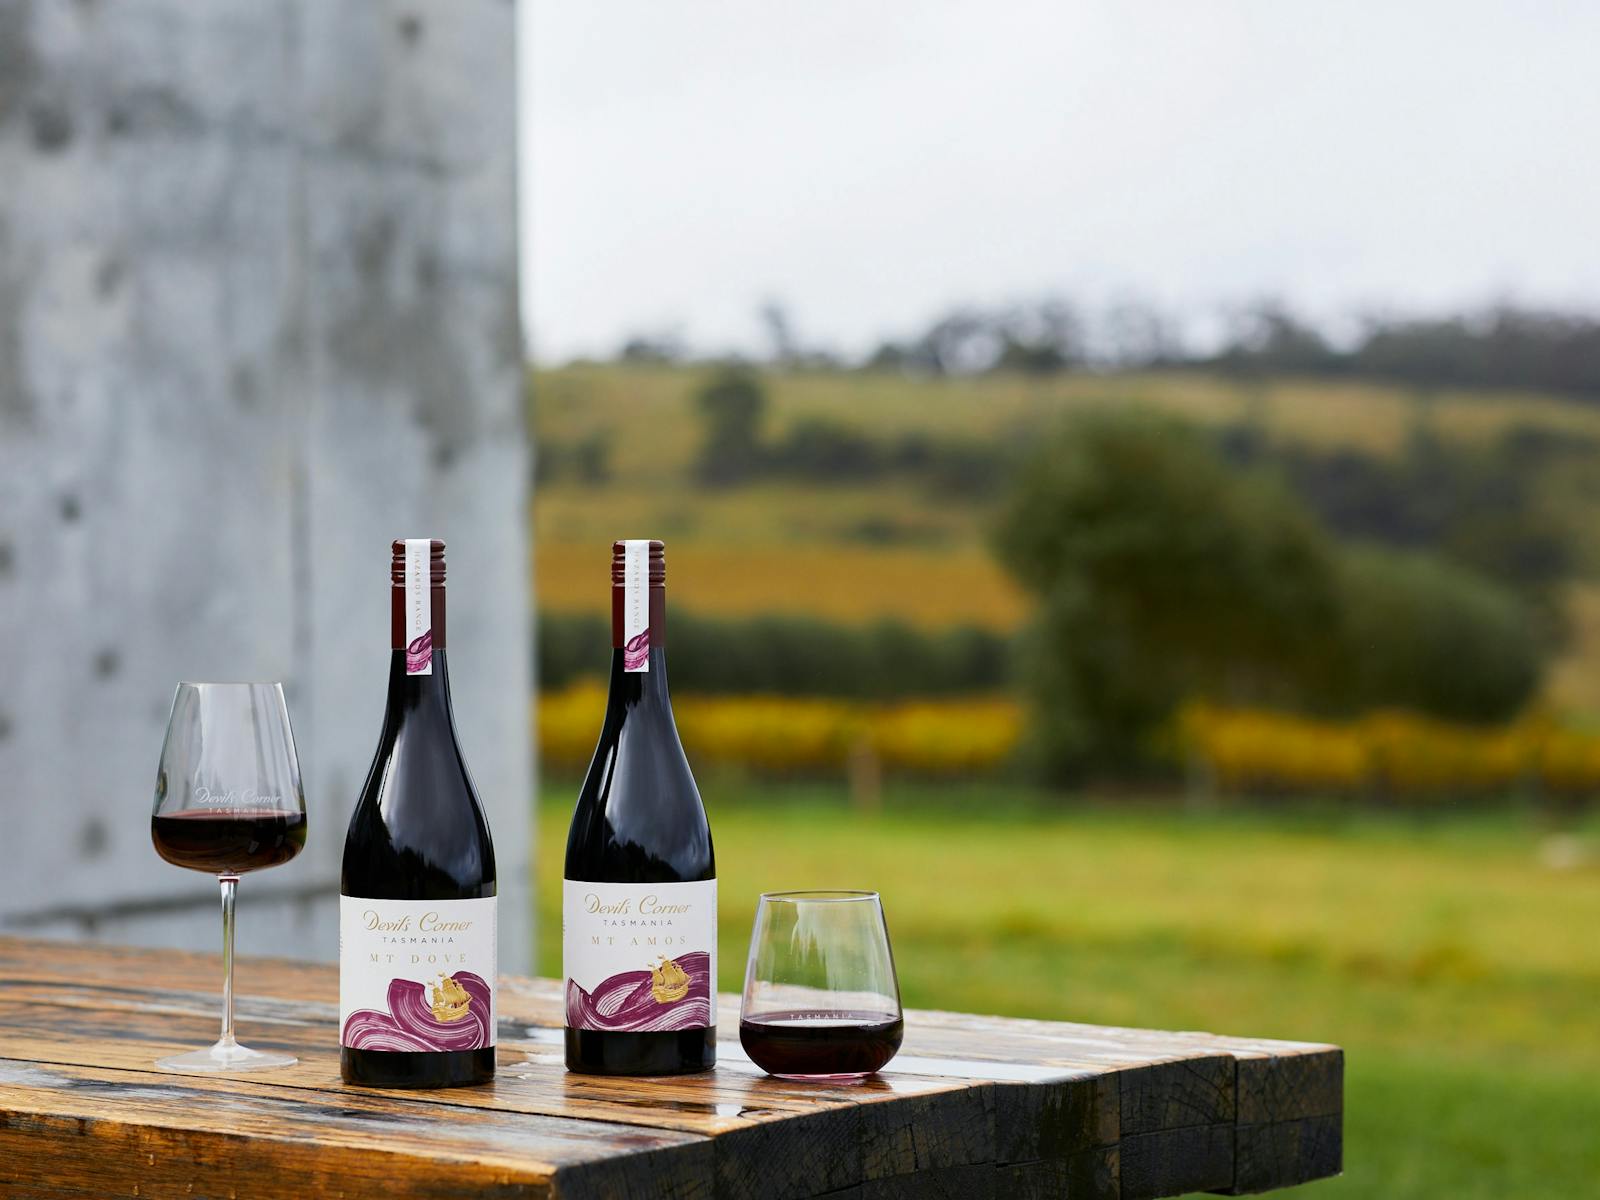 2 bottles of wine and glasses sitting on an outdoor table with autumn vineyards behind